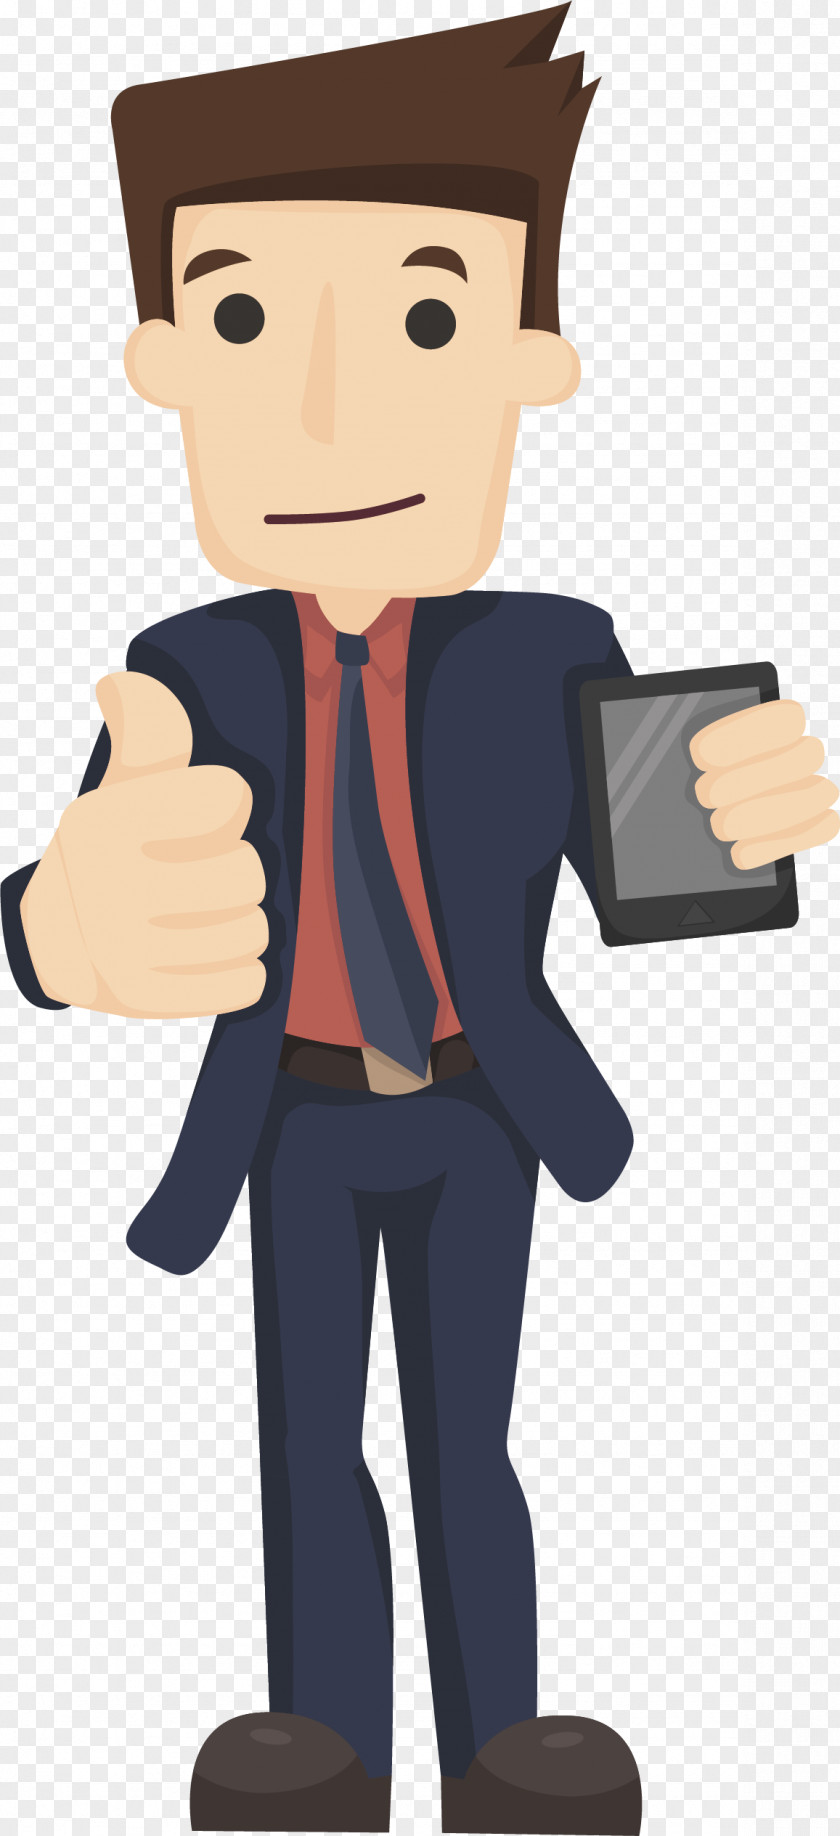 Someone Who Is Using A Cell Phone Businessperson Royalty-free Illustration PNG